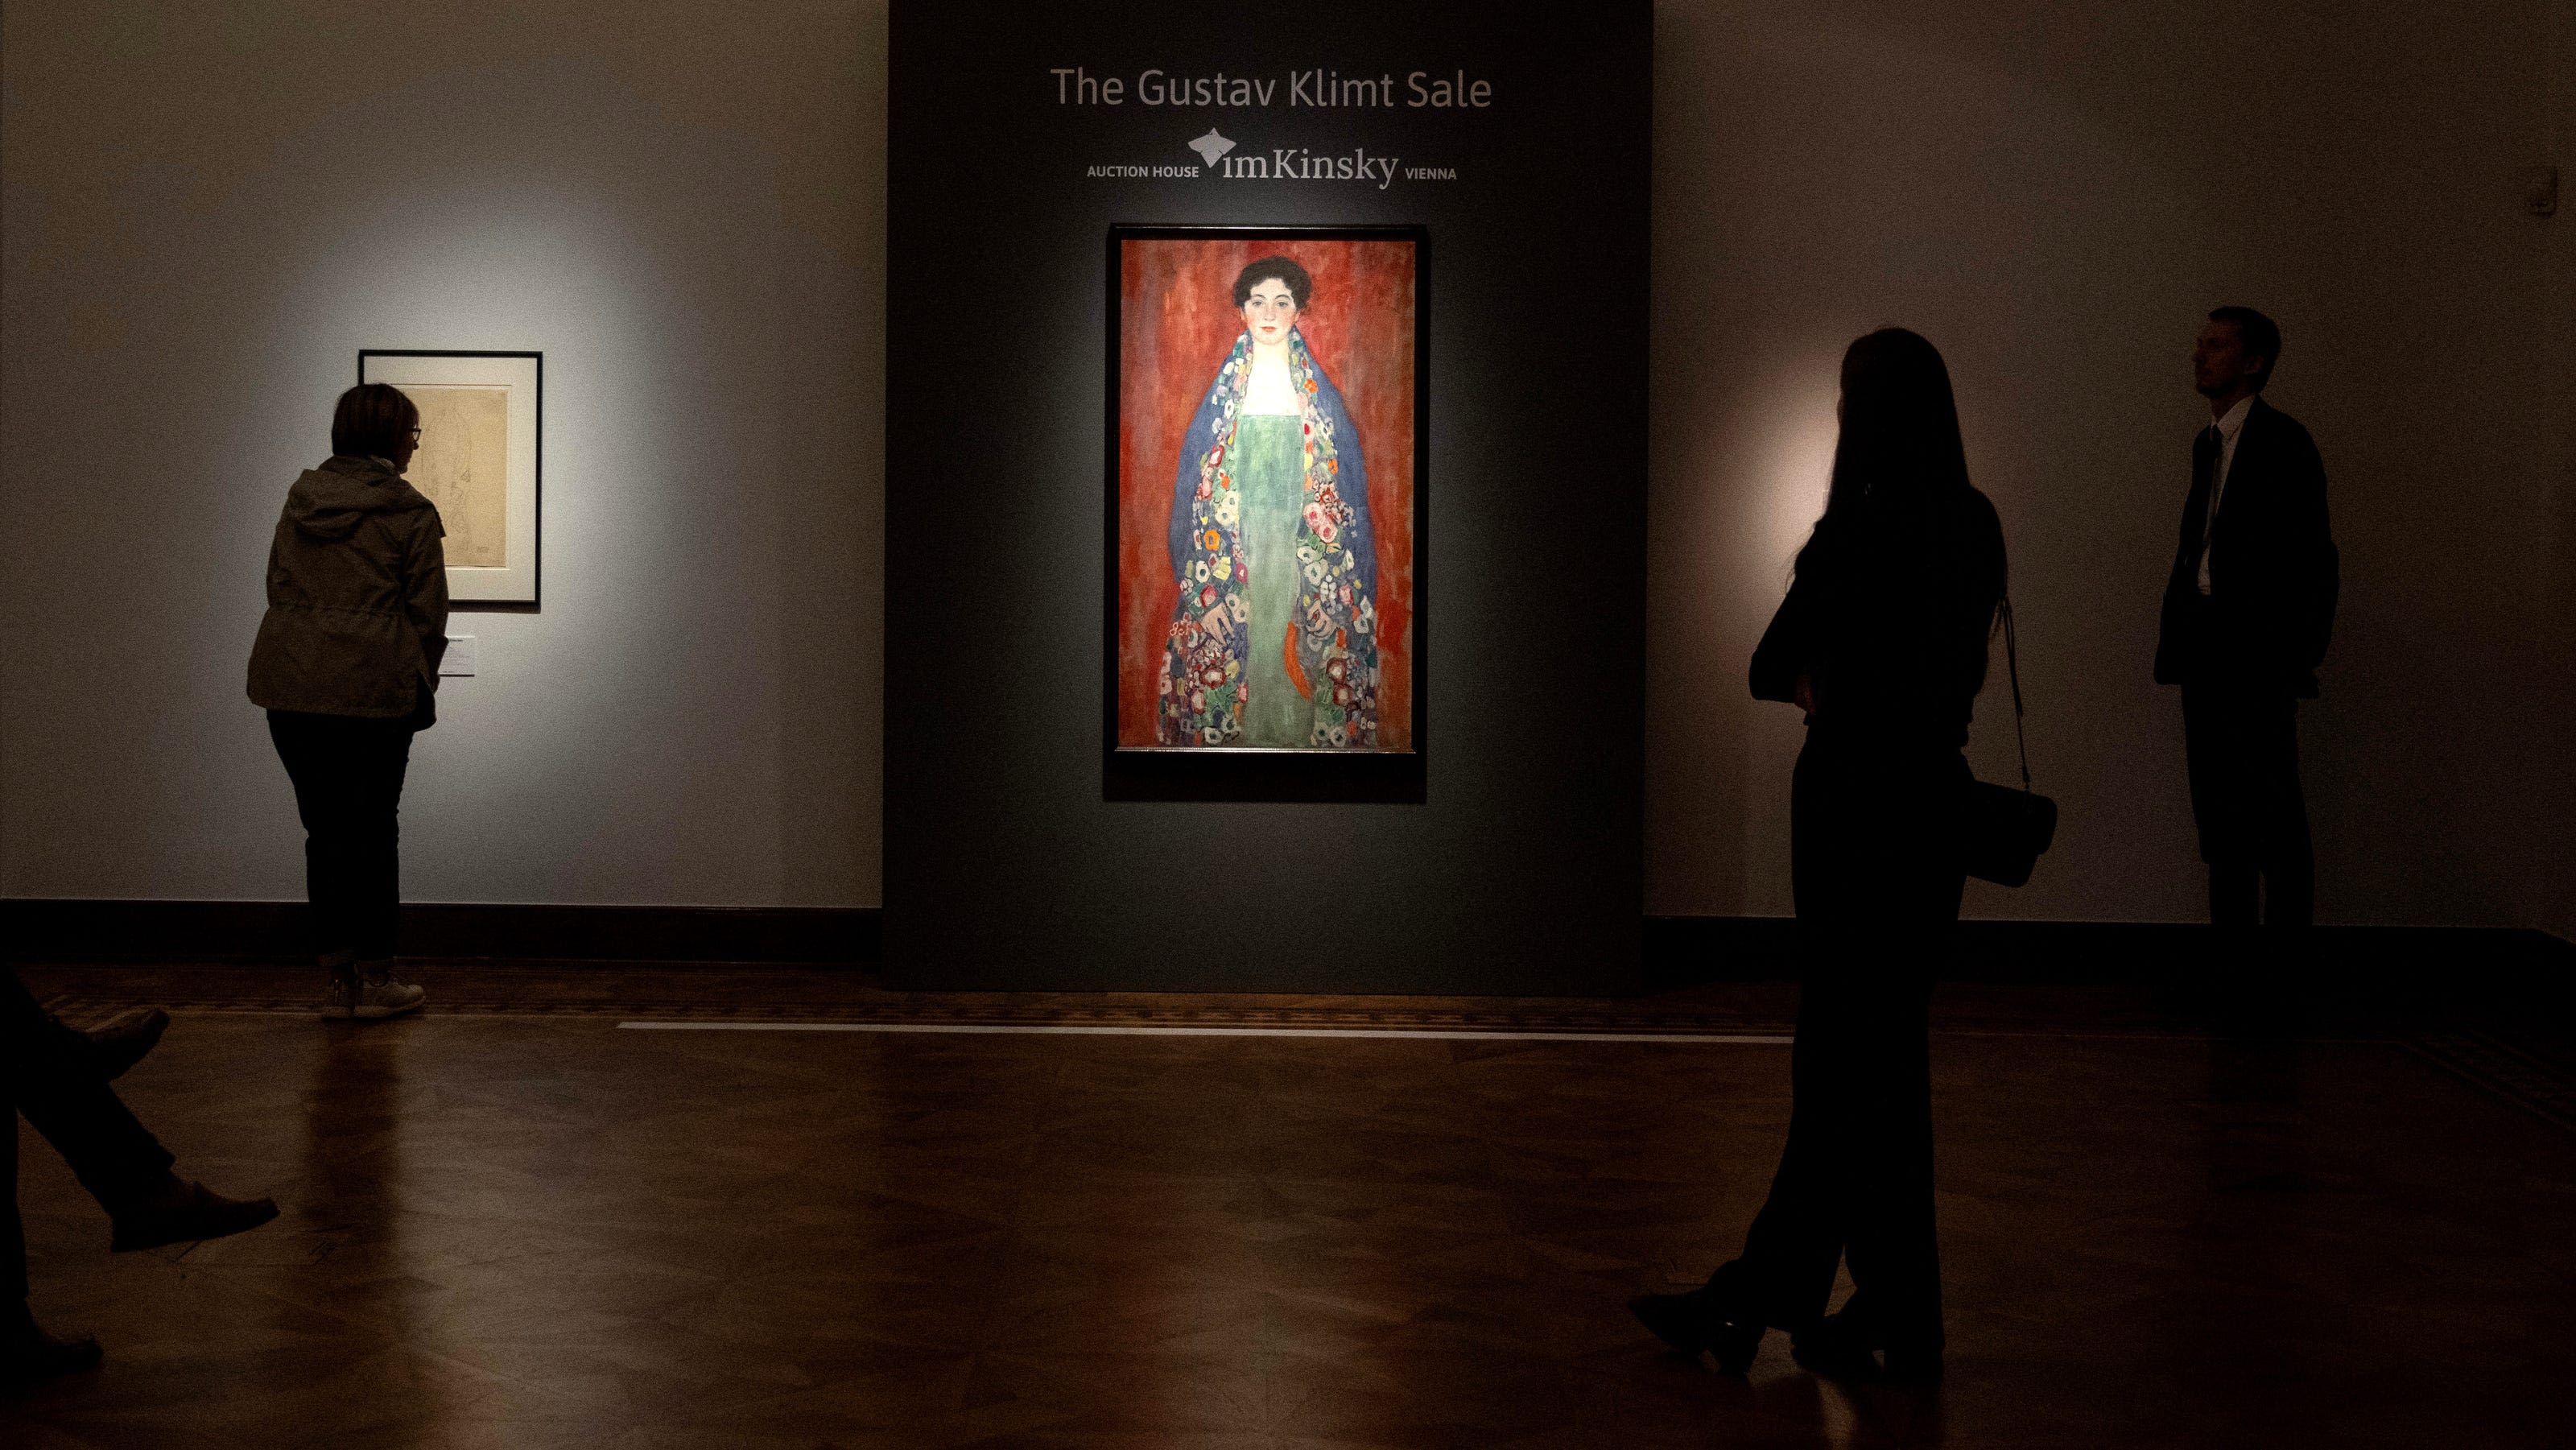 Painting by Gustav Klimt sold for $32 million after being lost for about 100 years